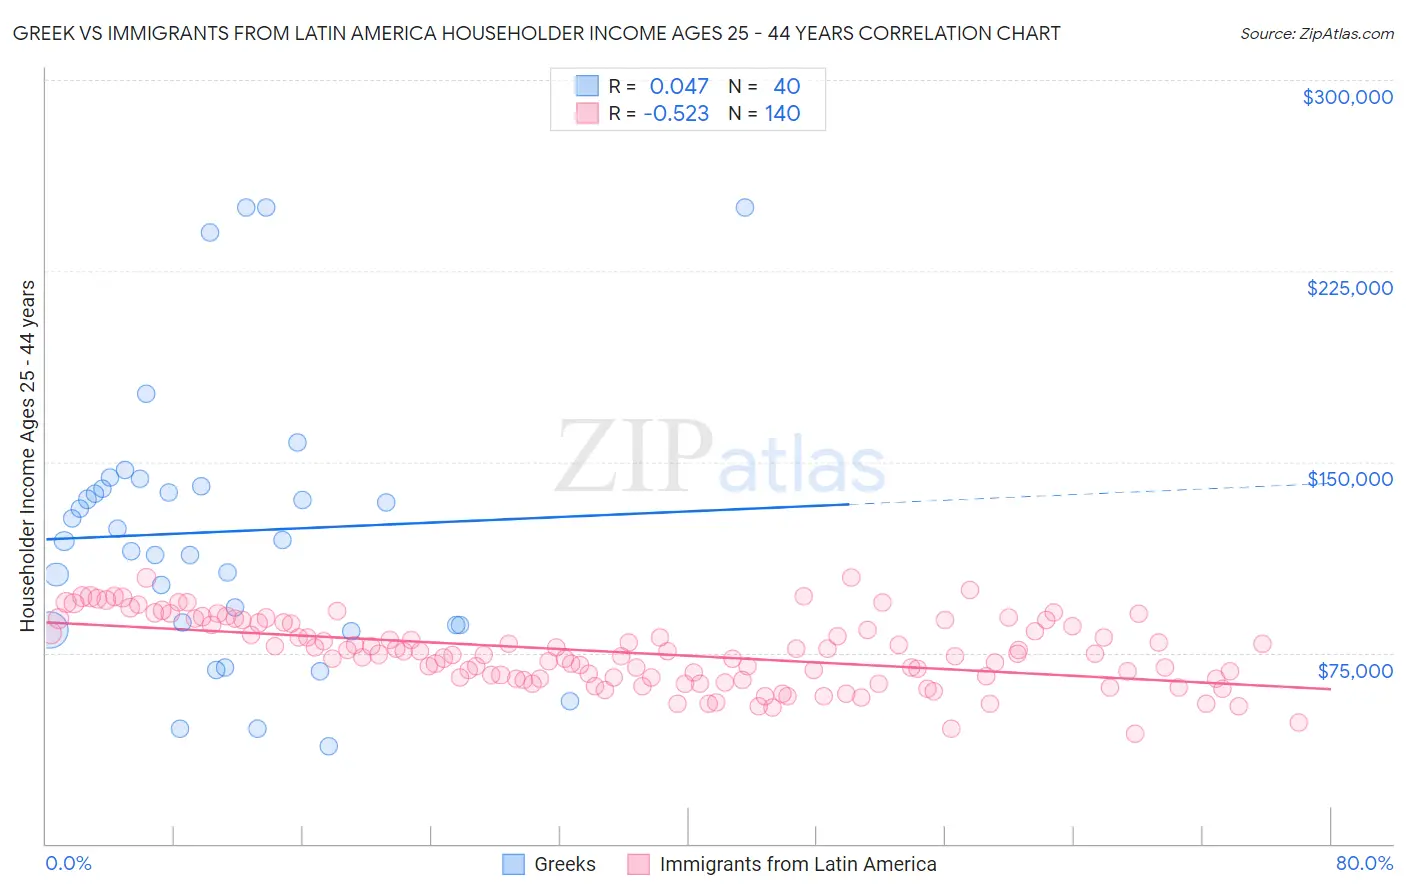 Greek vs Immigrants from Latin America Householder Income Ages 25 - 44 years